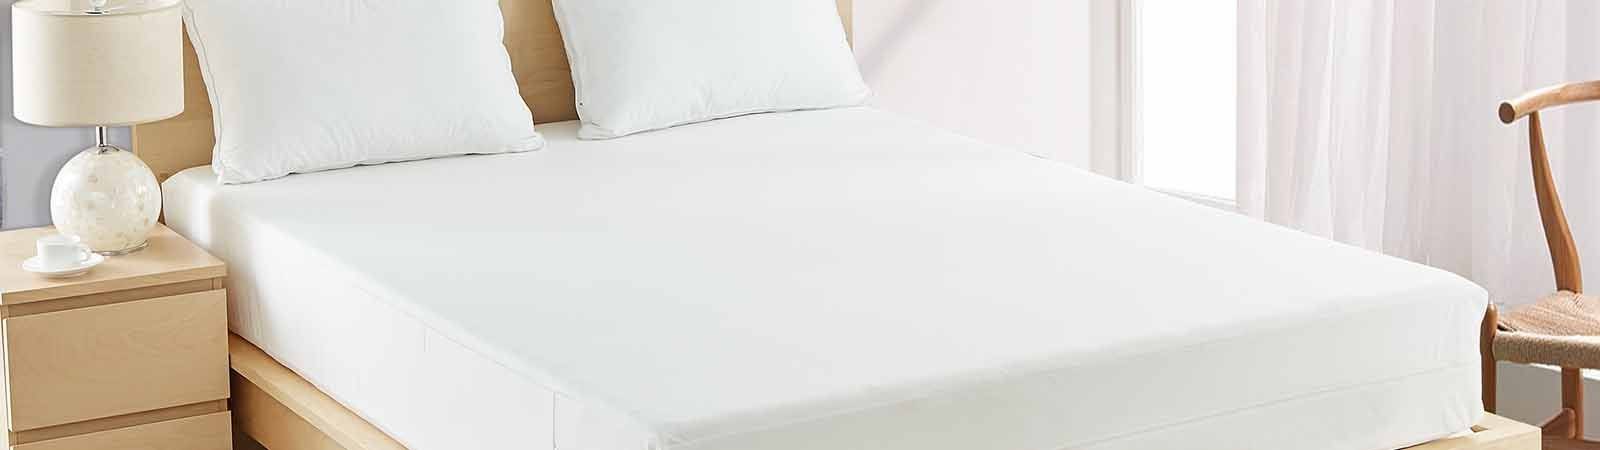 Dust mite covers provide complete protection for your mattress, pillows, feather bed, and comforters 